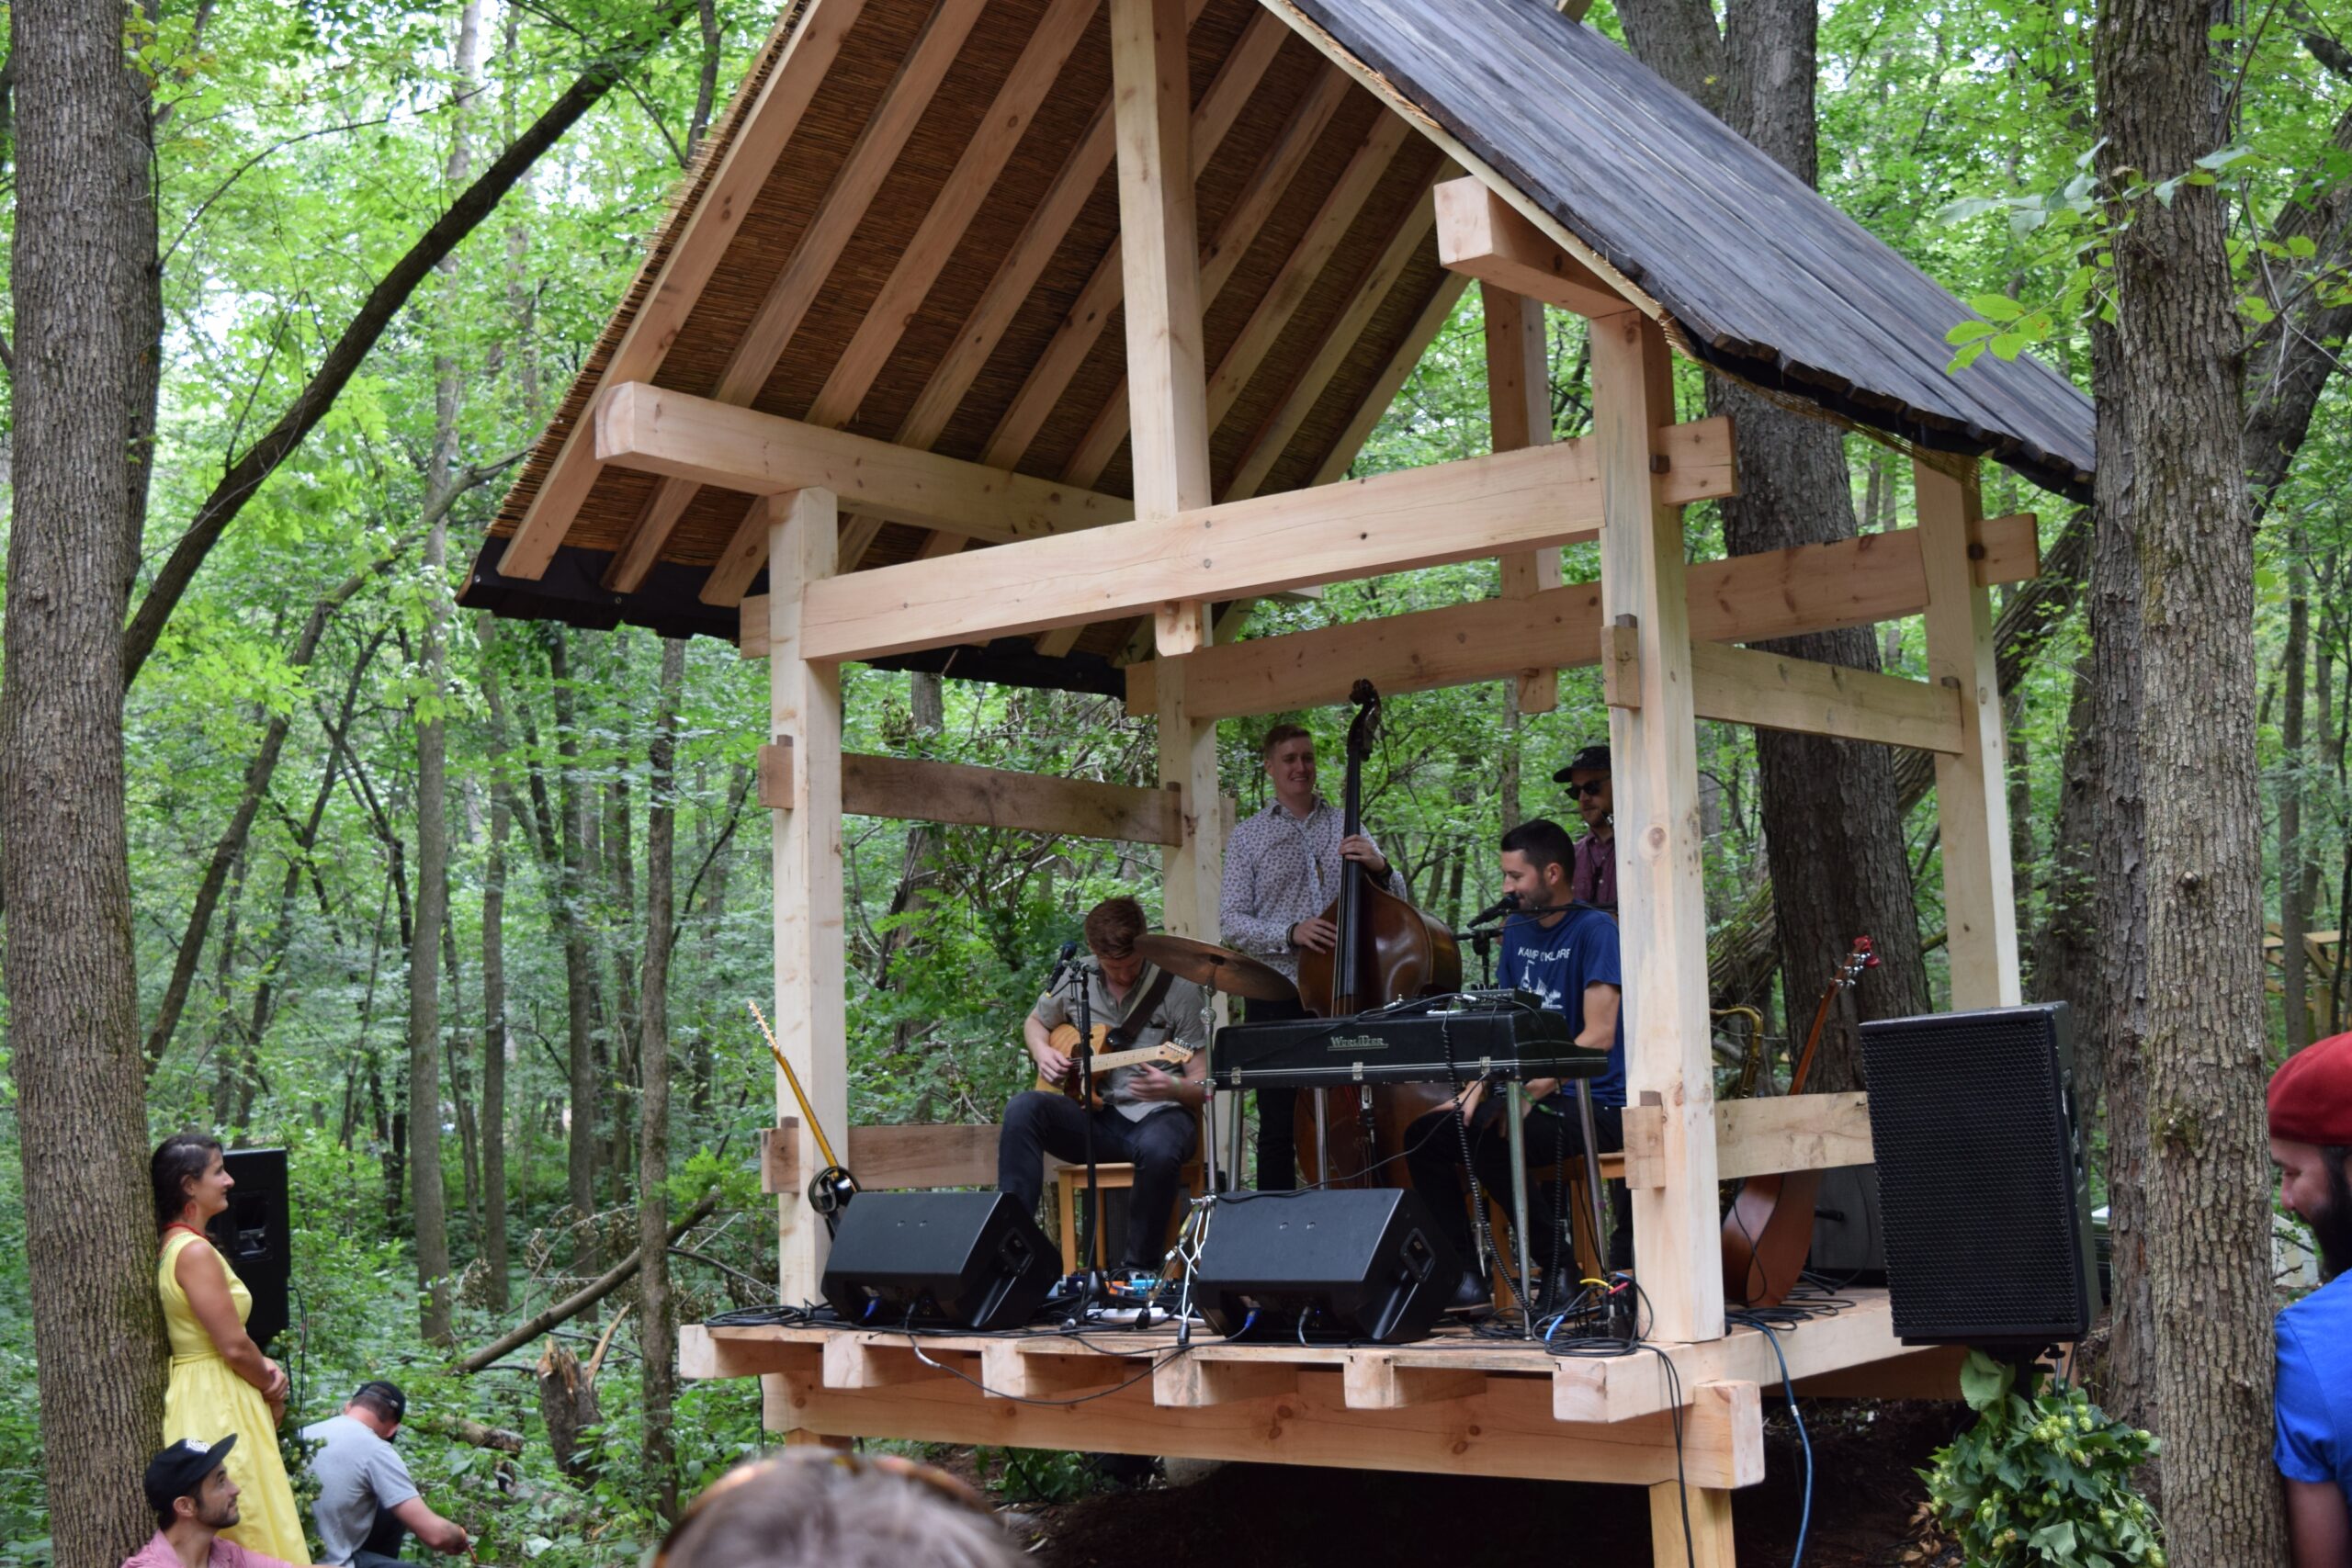 Musicians, Artists Collaborate In Harmony At Eaux Claires Music And Arts Festival